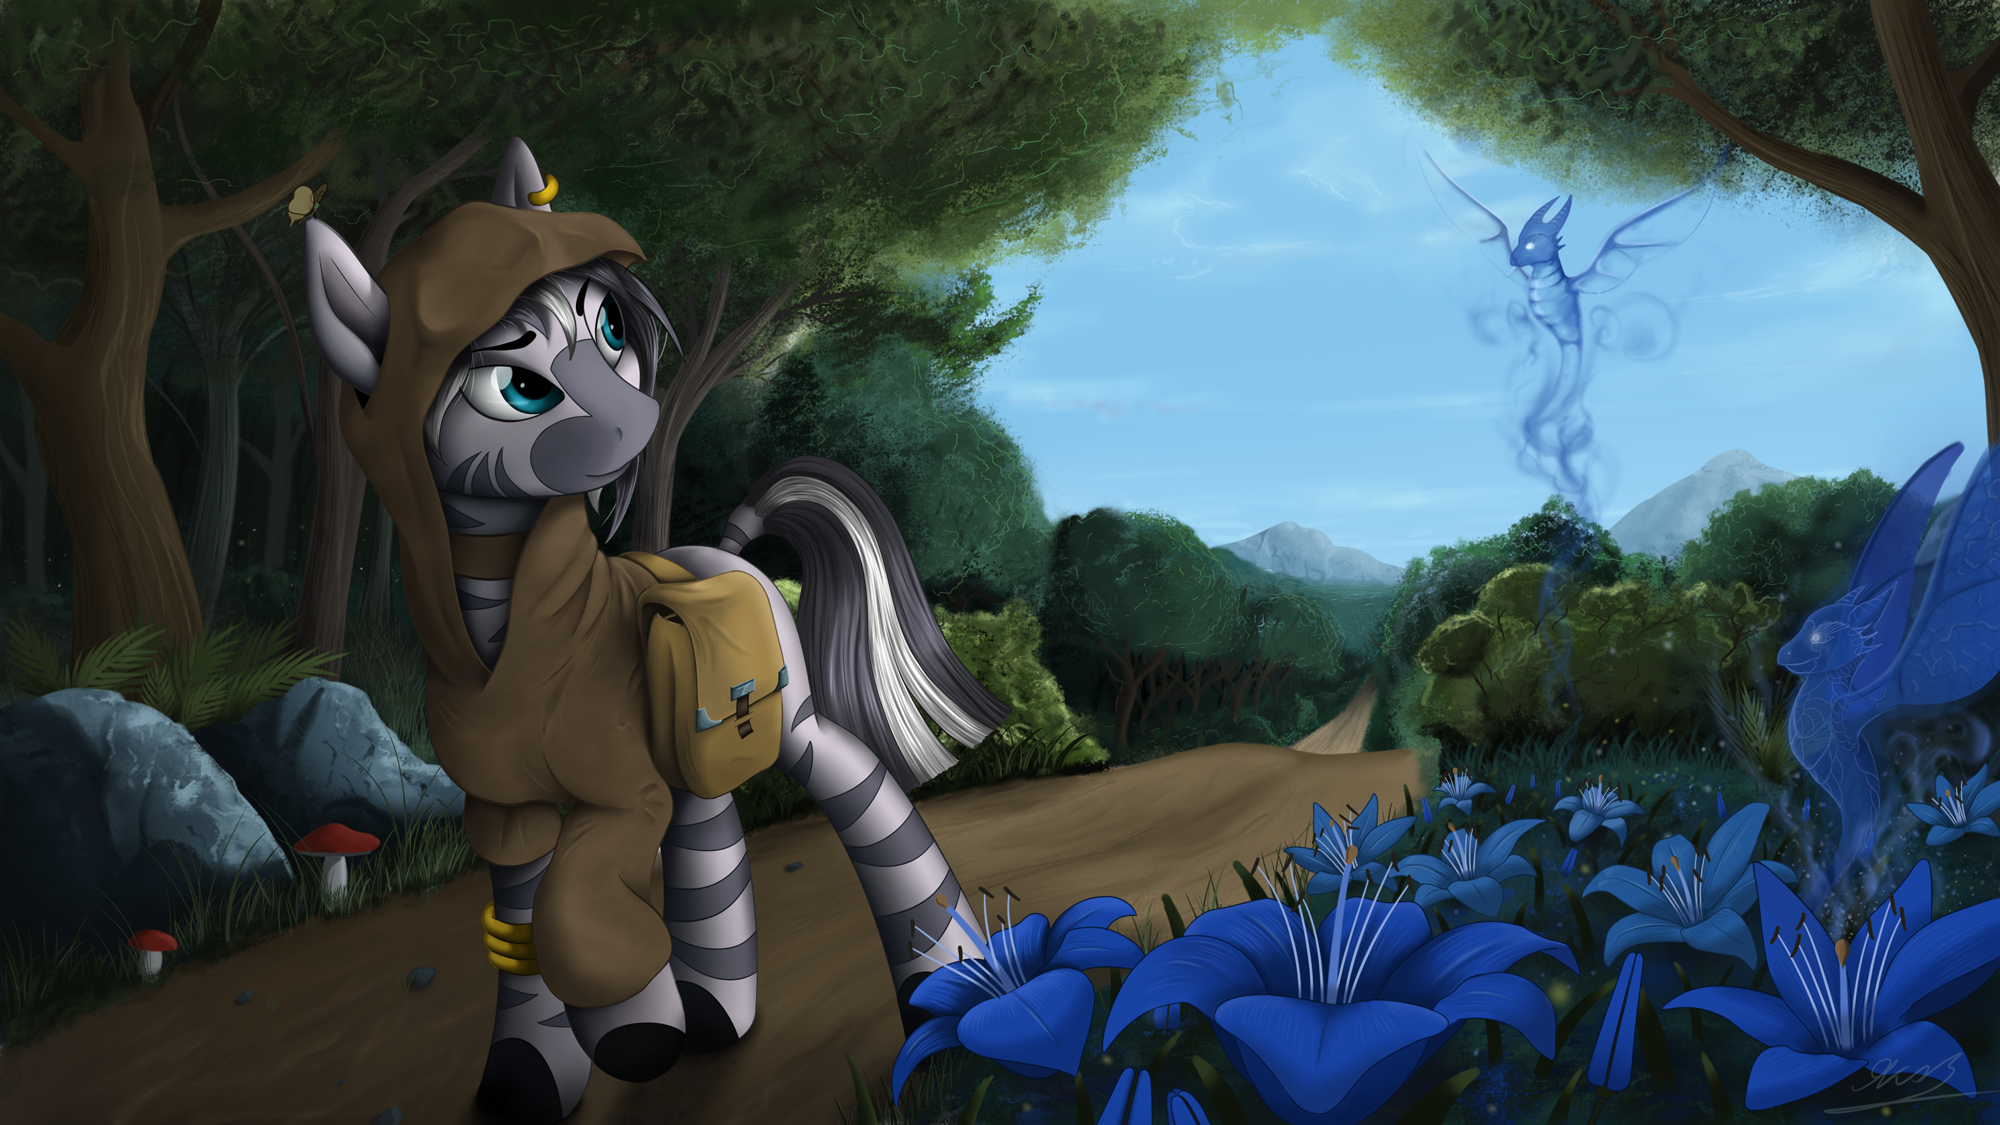 Peaceful Place (request) by Yakovlev-vad